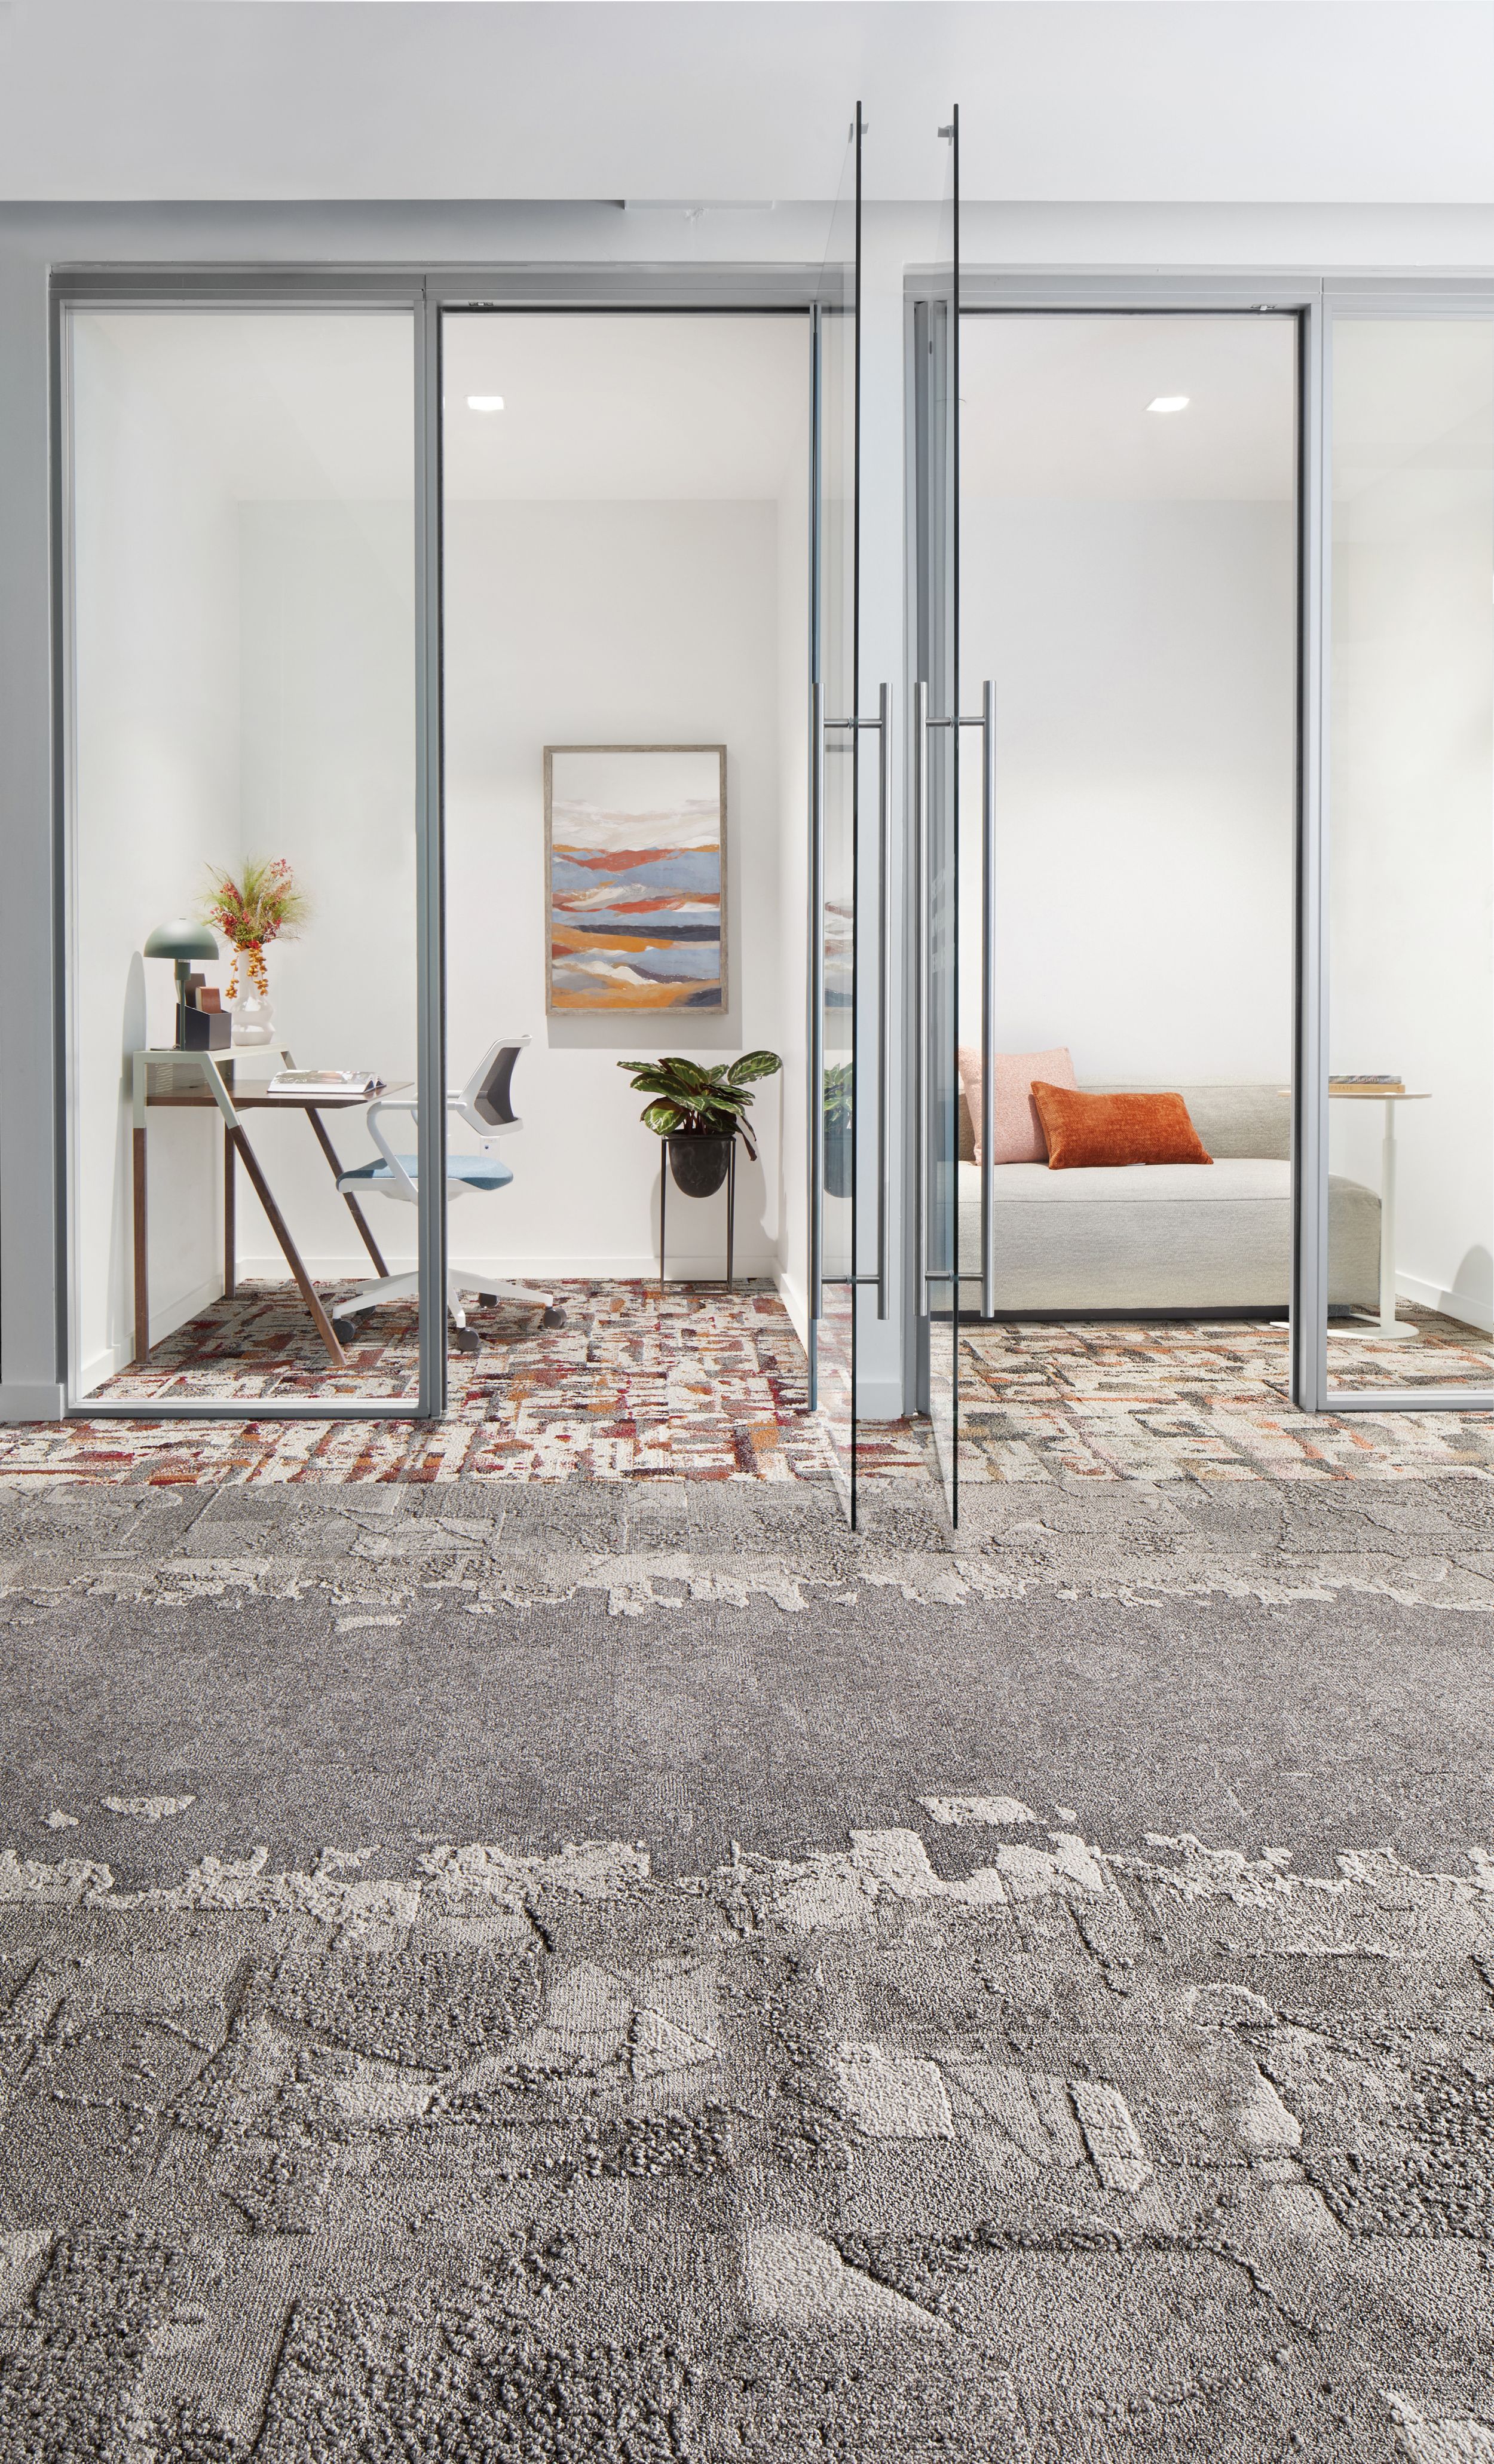 Interface Mountain Rock, Bridge Creek, Flat Rock, and Panola Mountain carpet tile in entryway to two small divided rooms with a couch and a desk numéro d’image 9